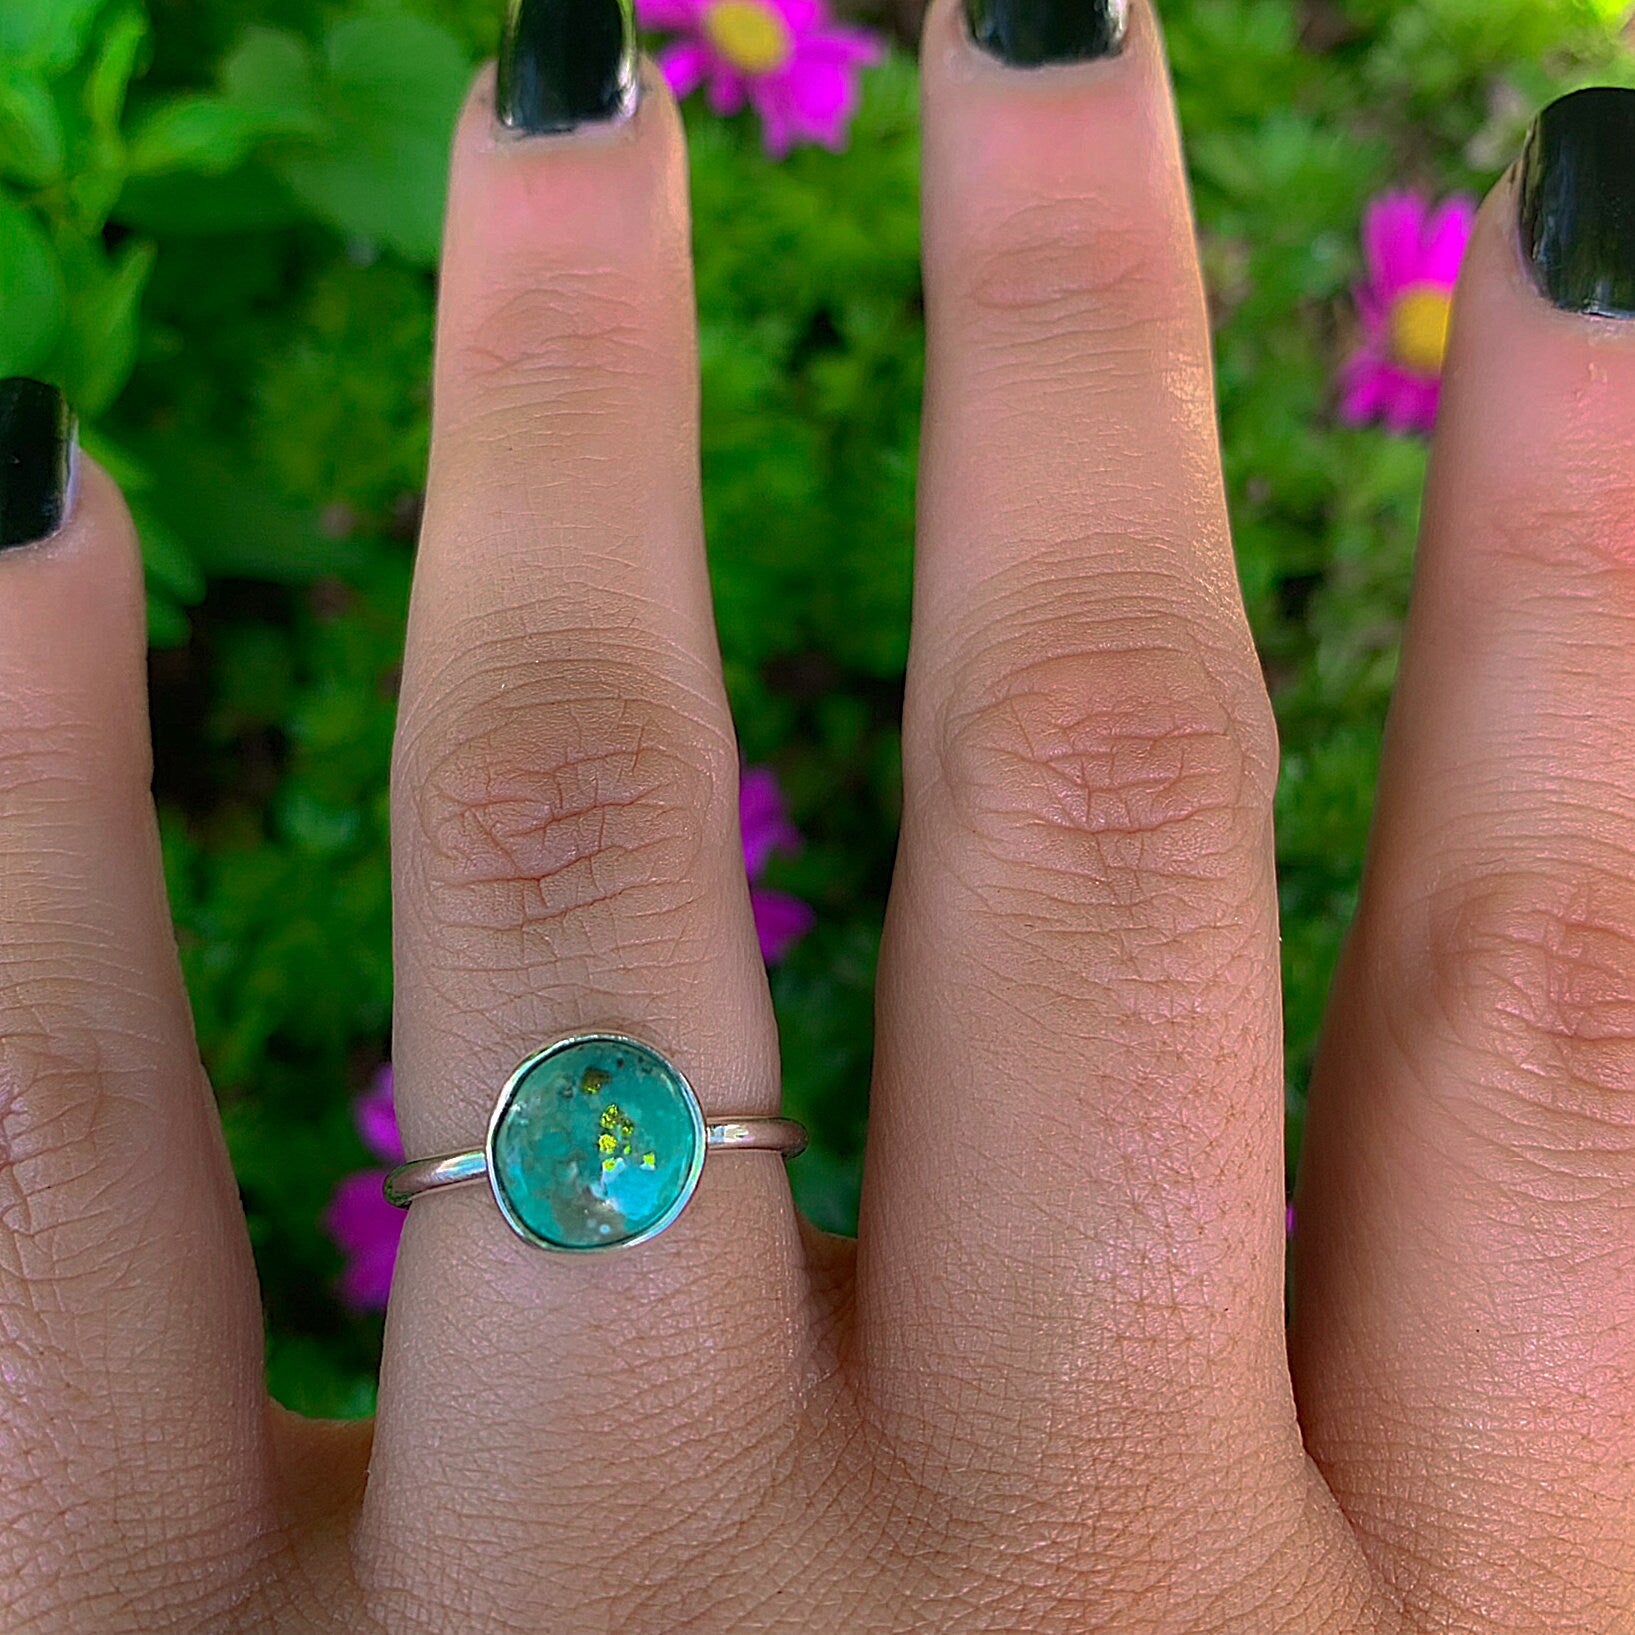 Nacozari Turquoise Ring - Size 6 - Sterling Silver - Teal Turquoise Jewellery - Rare Turquoise Jewelry - Dainty Unique Pyrite Turquoise Ring